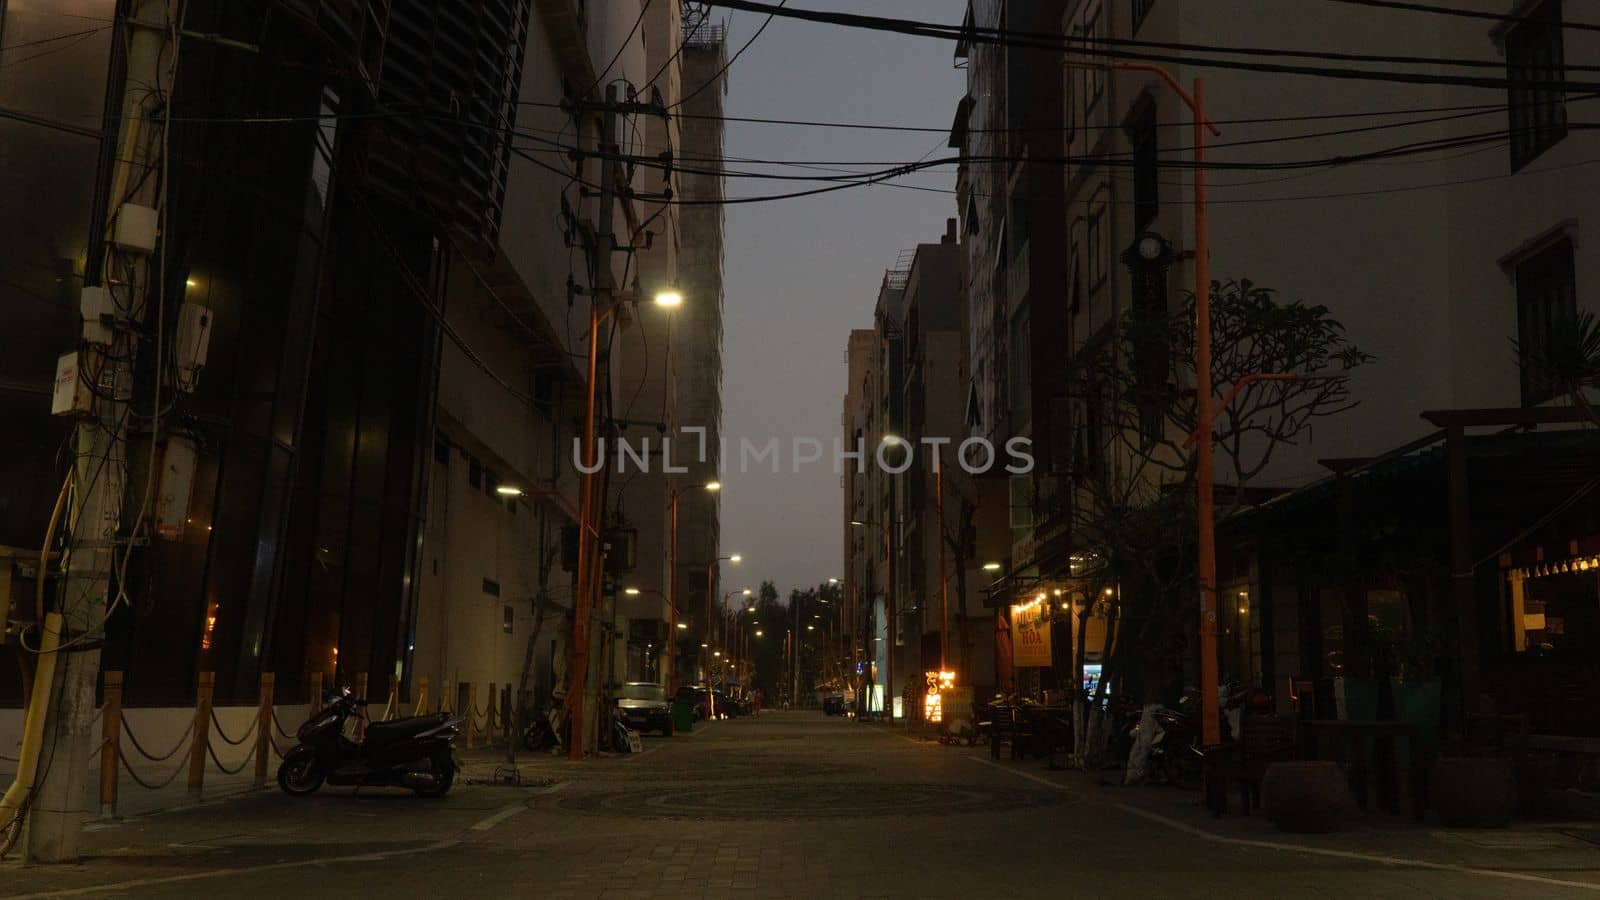 Asian street in the evening with street lamps and tangled electric wires by voktybre